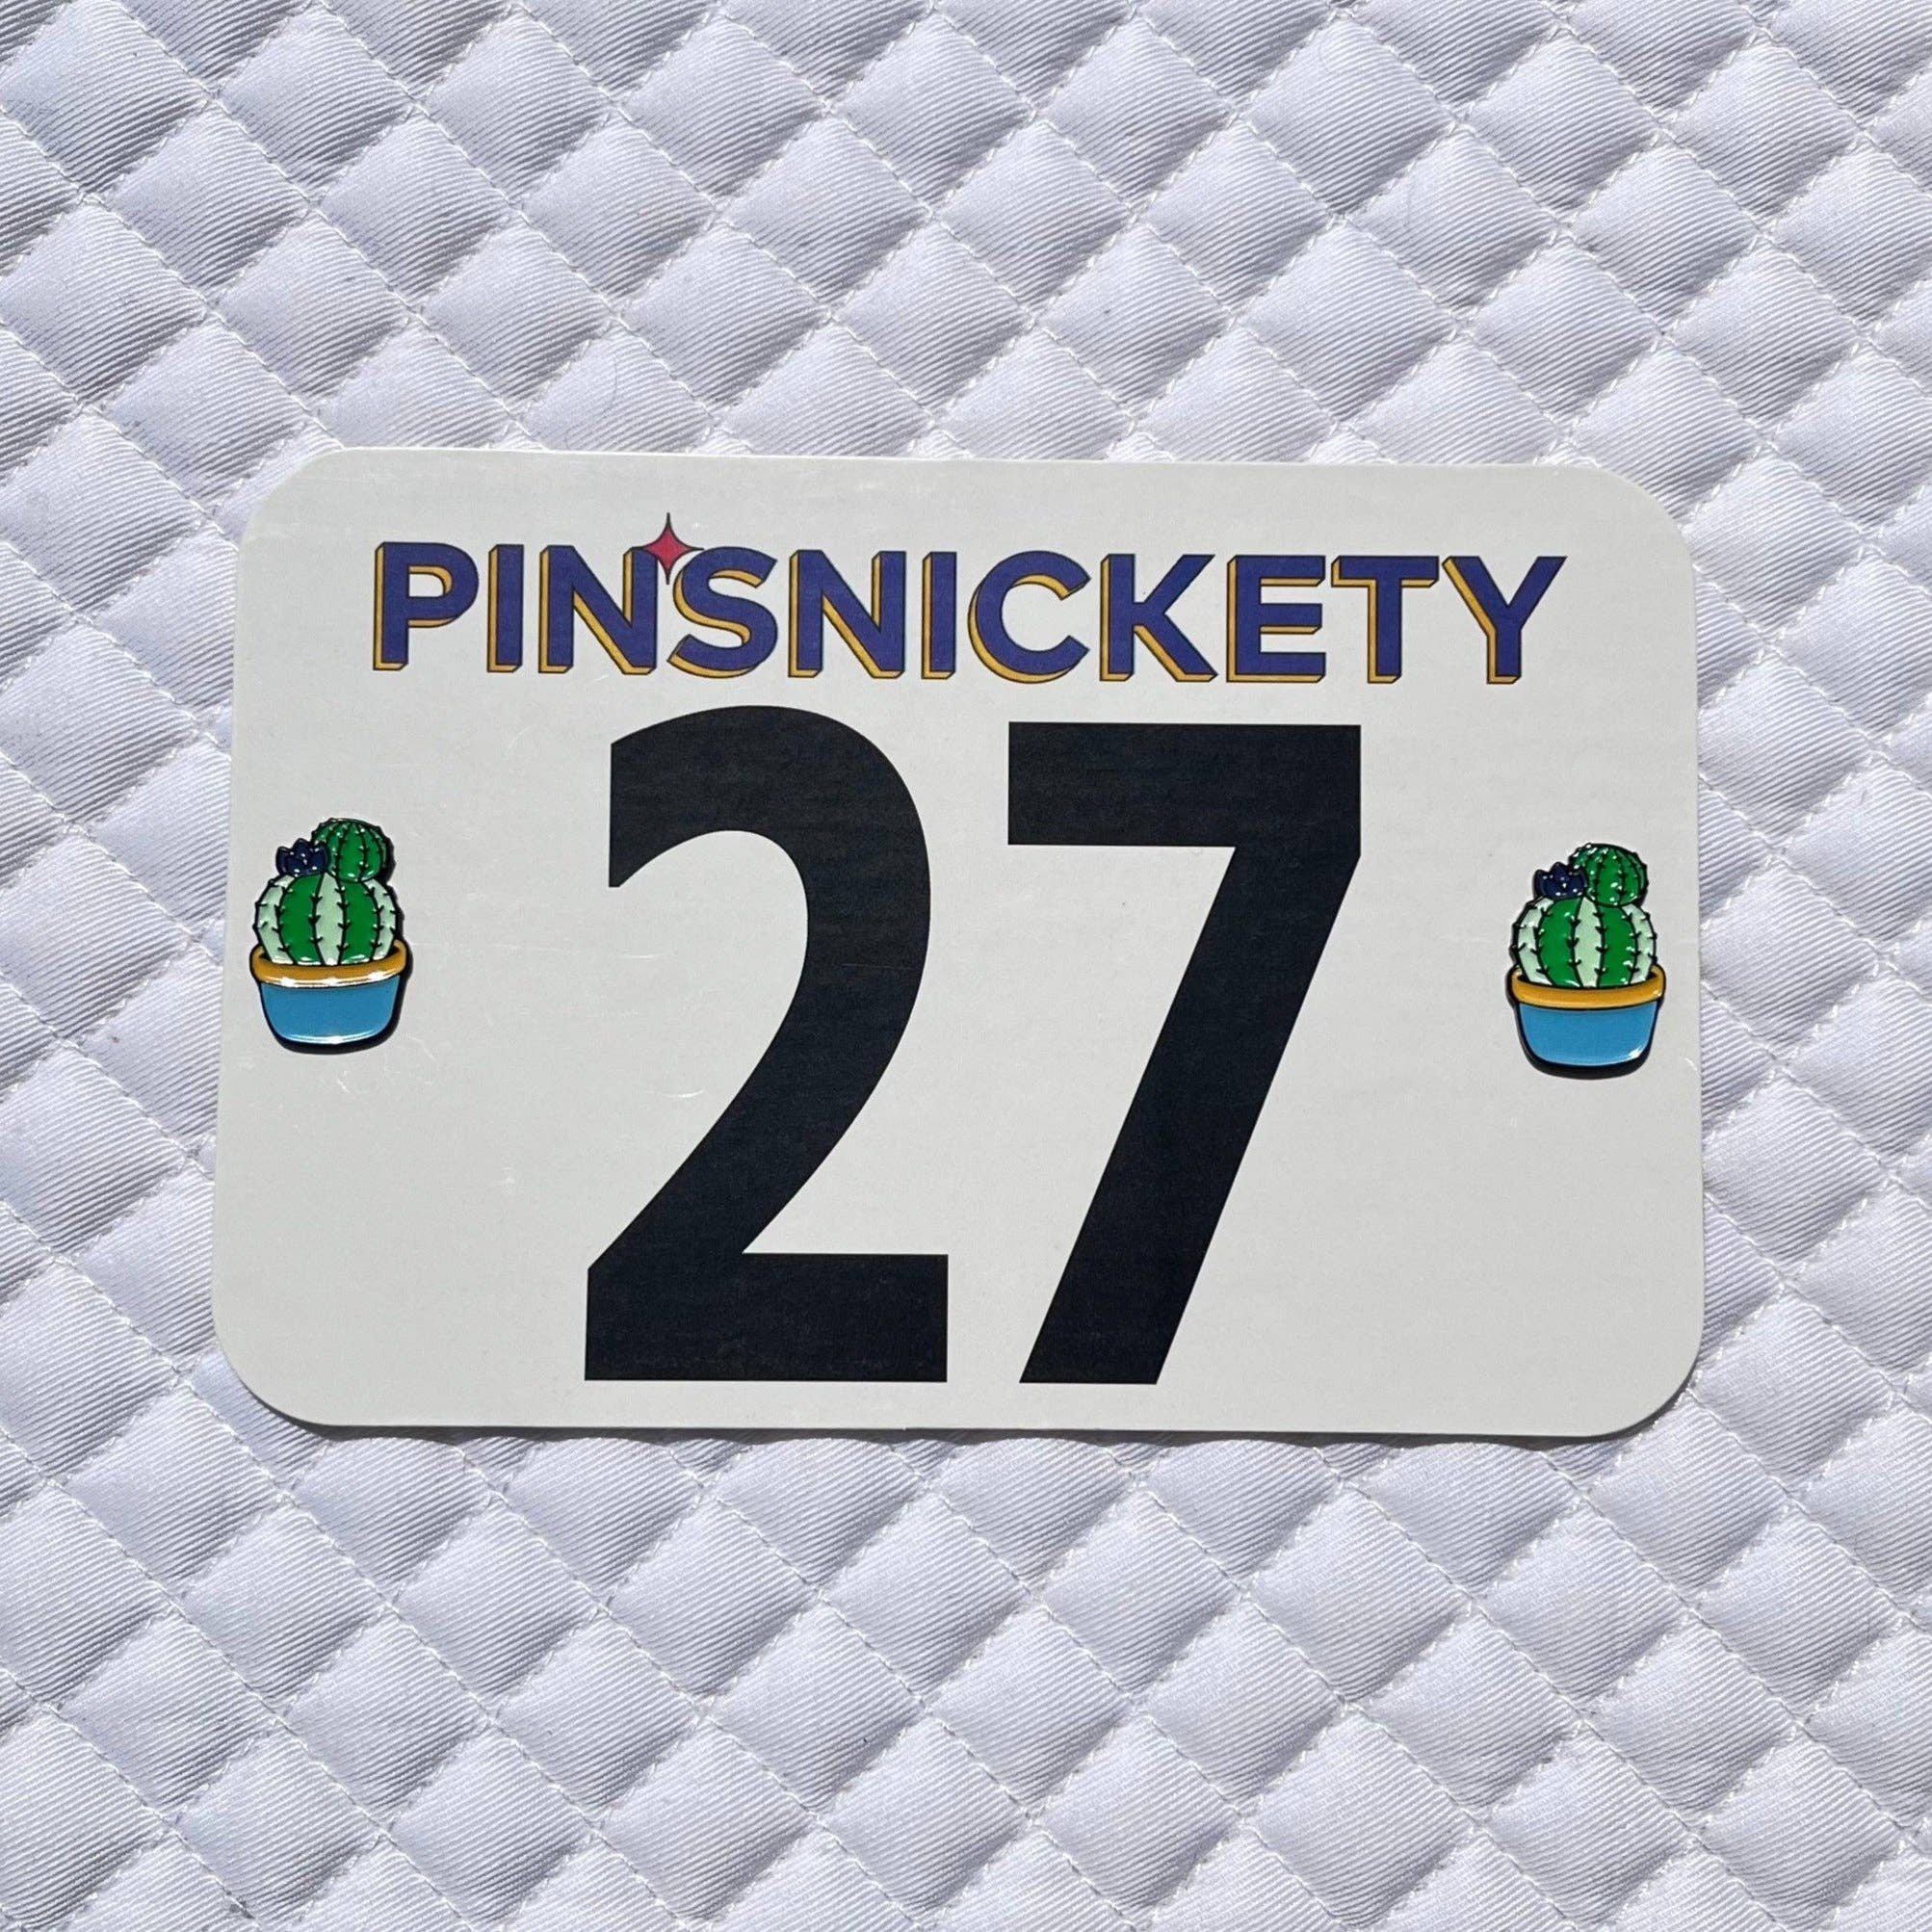 Pinsnickety - Cactus Pins